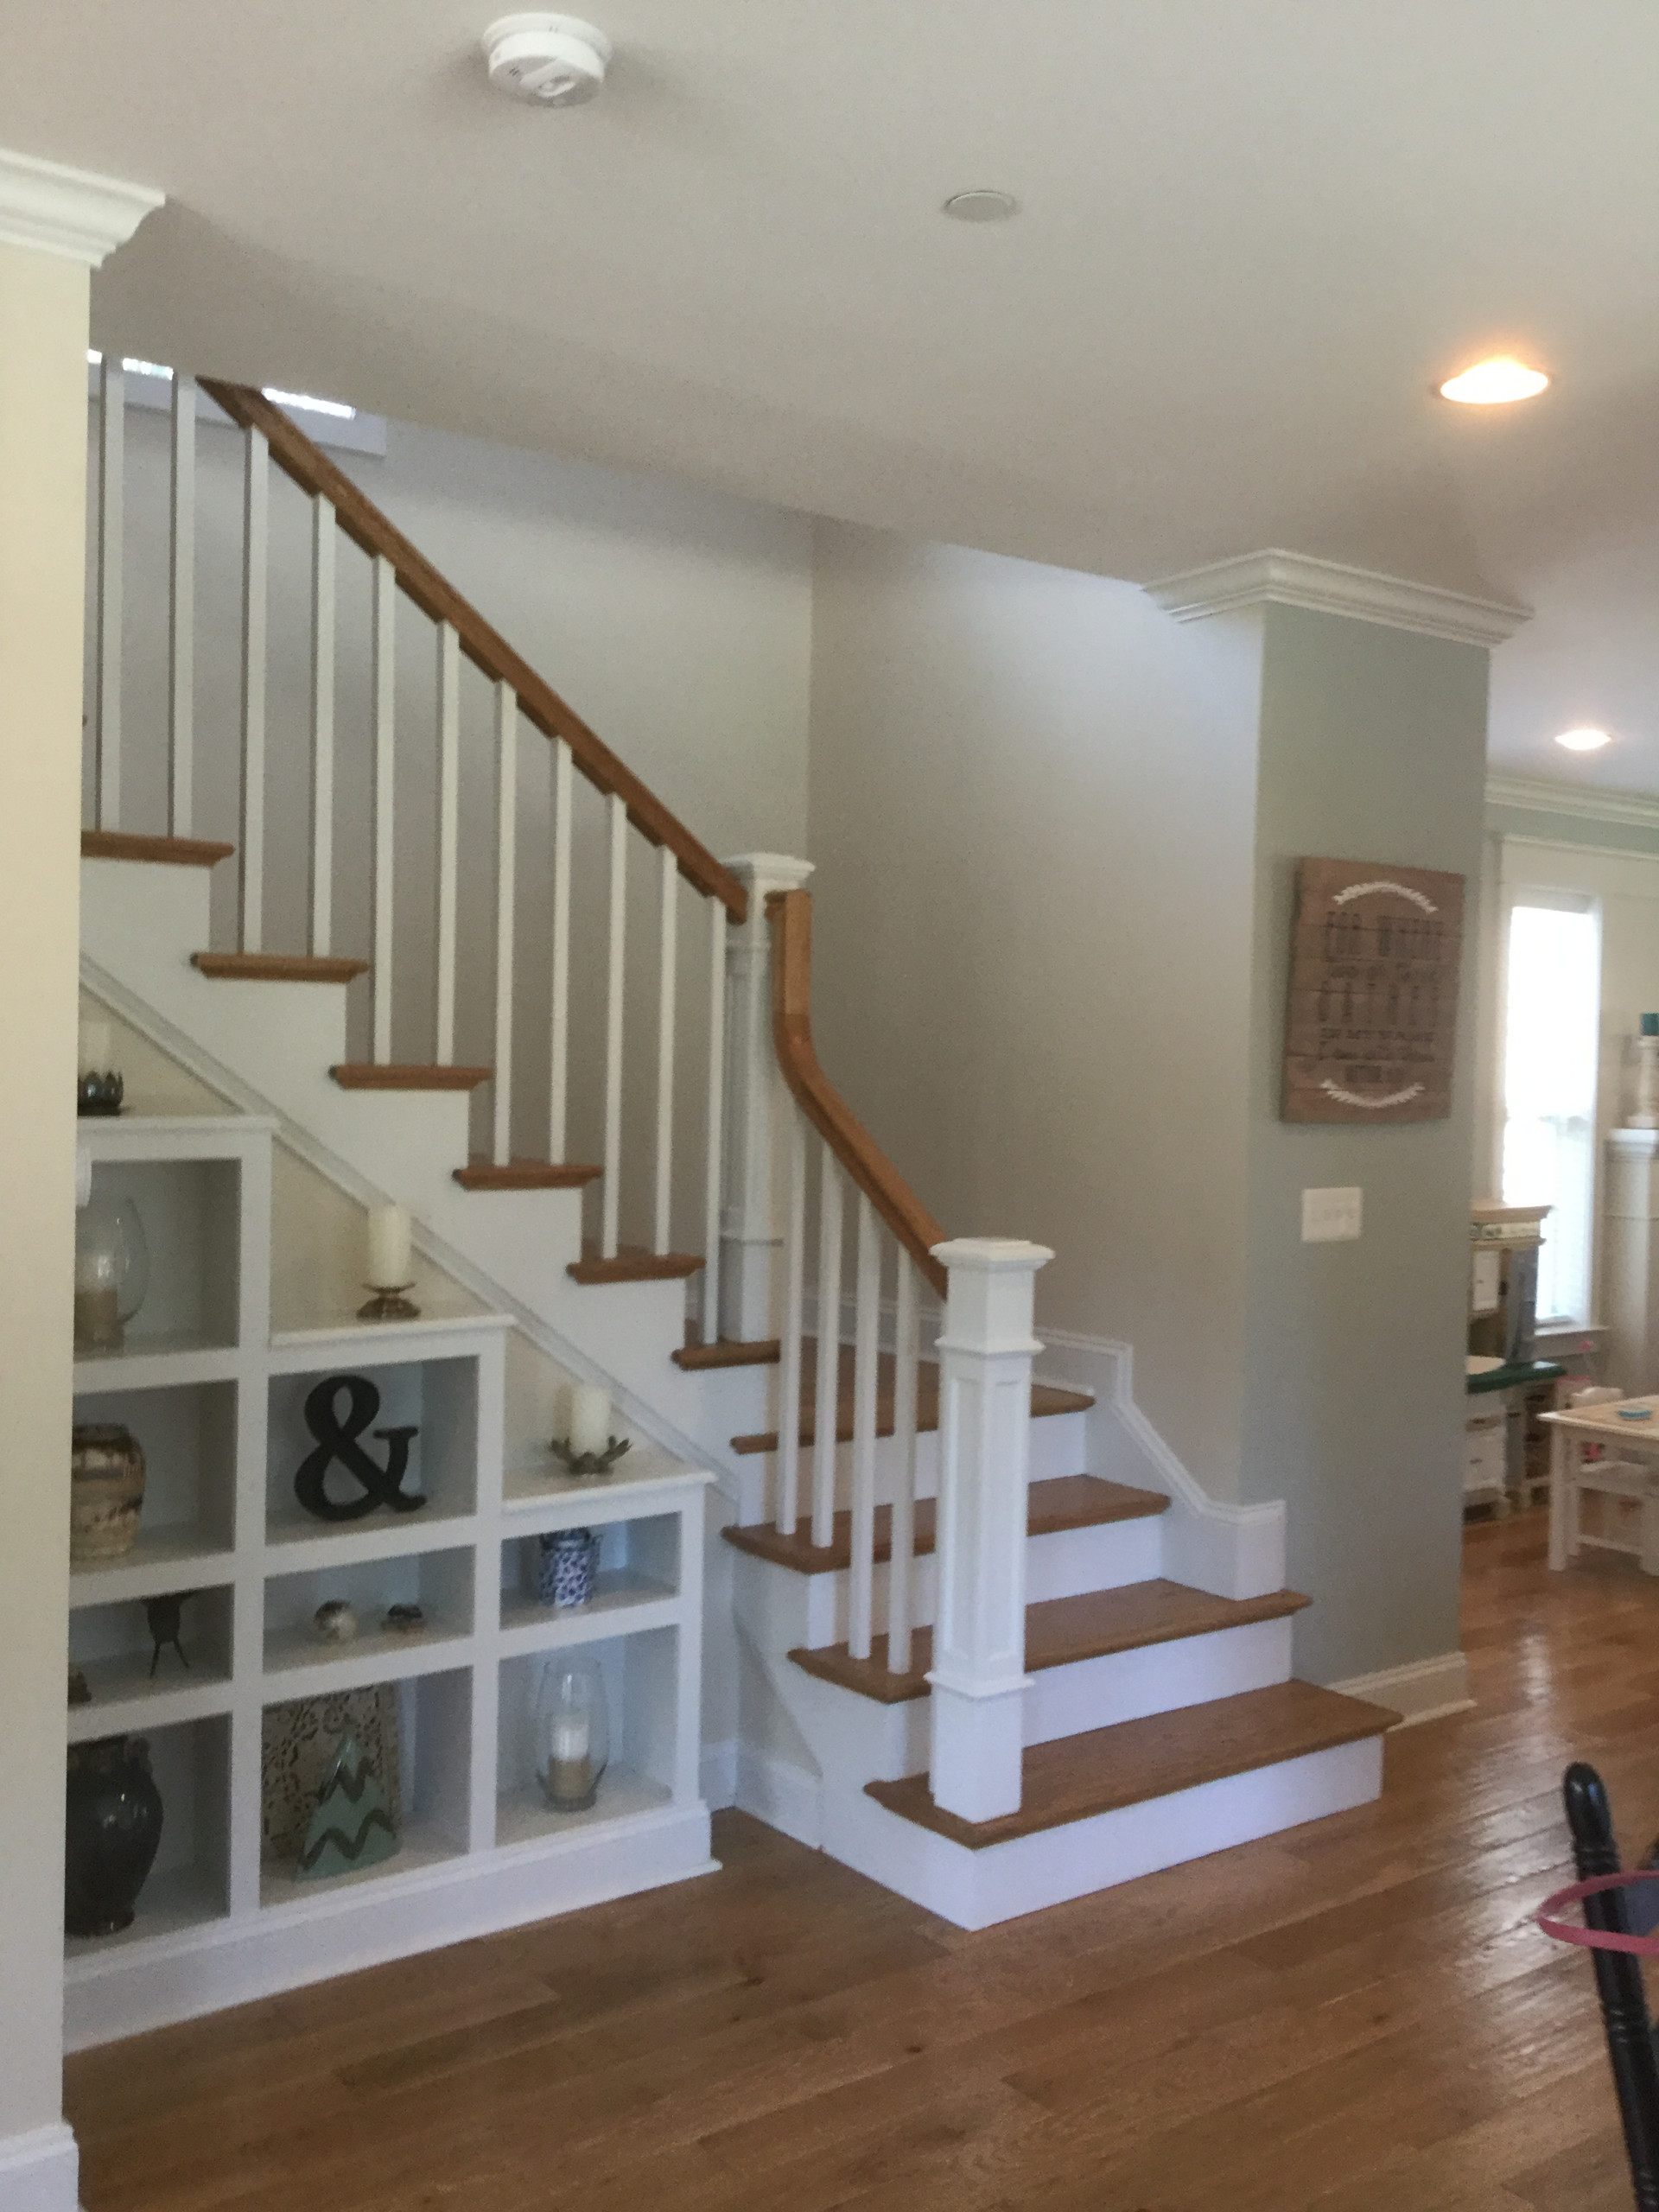 New home staircase